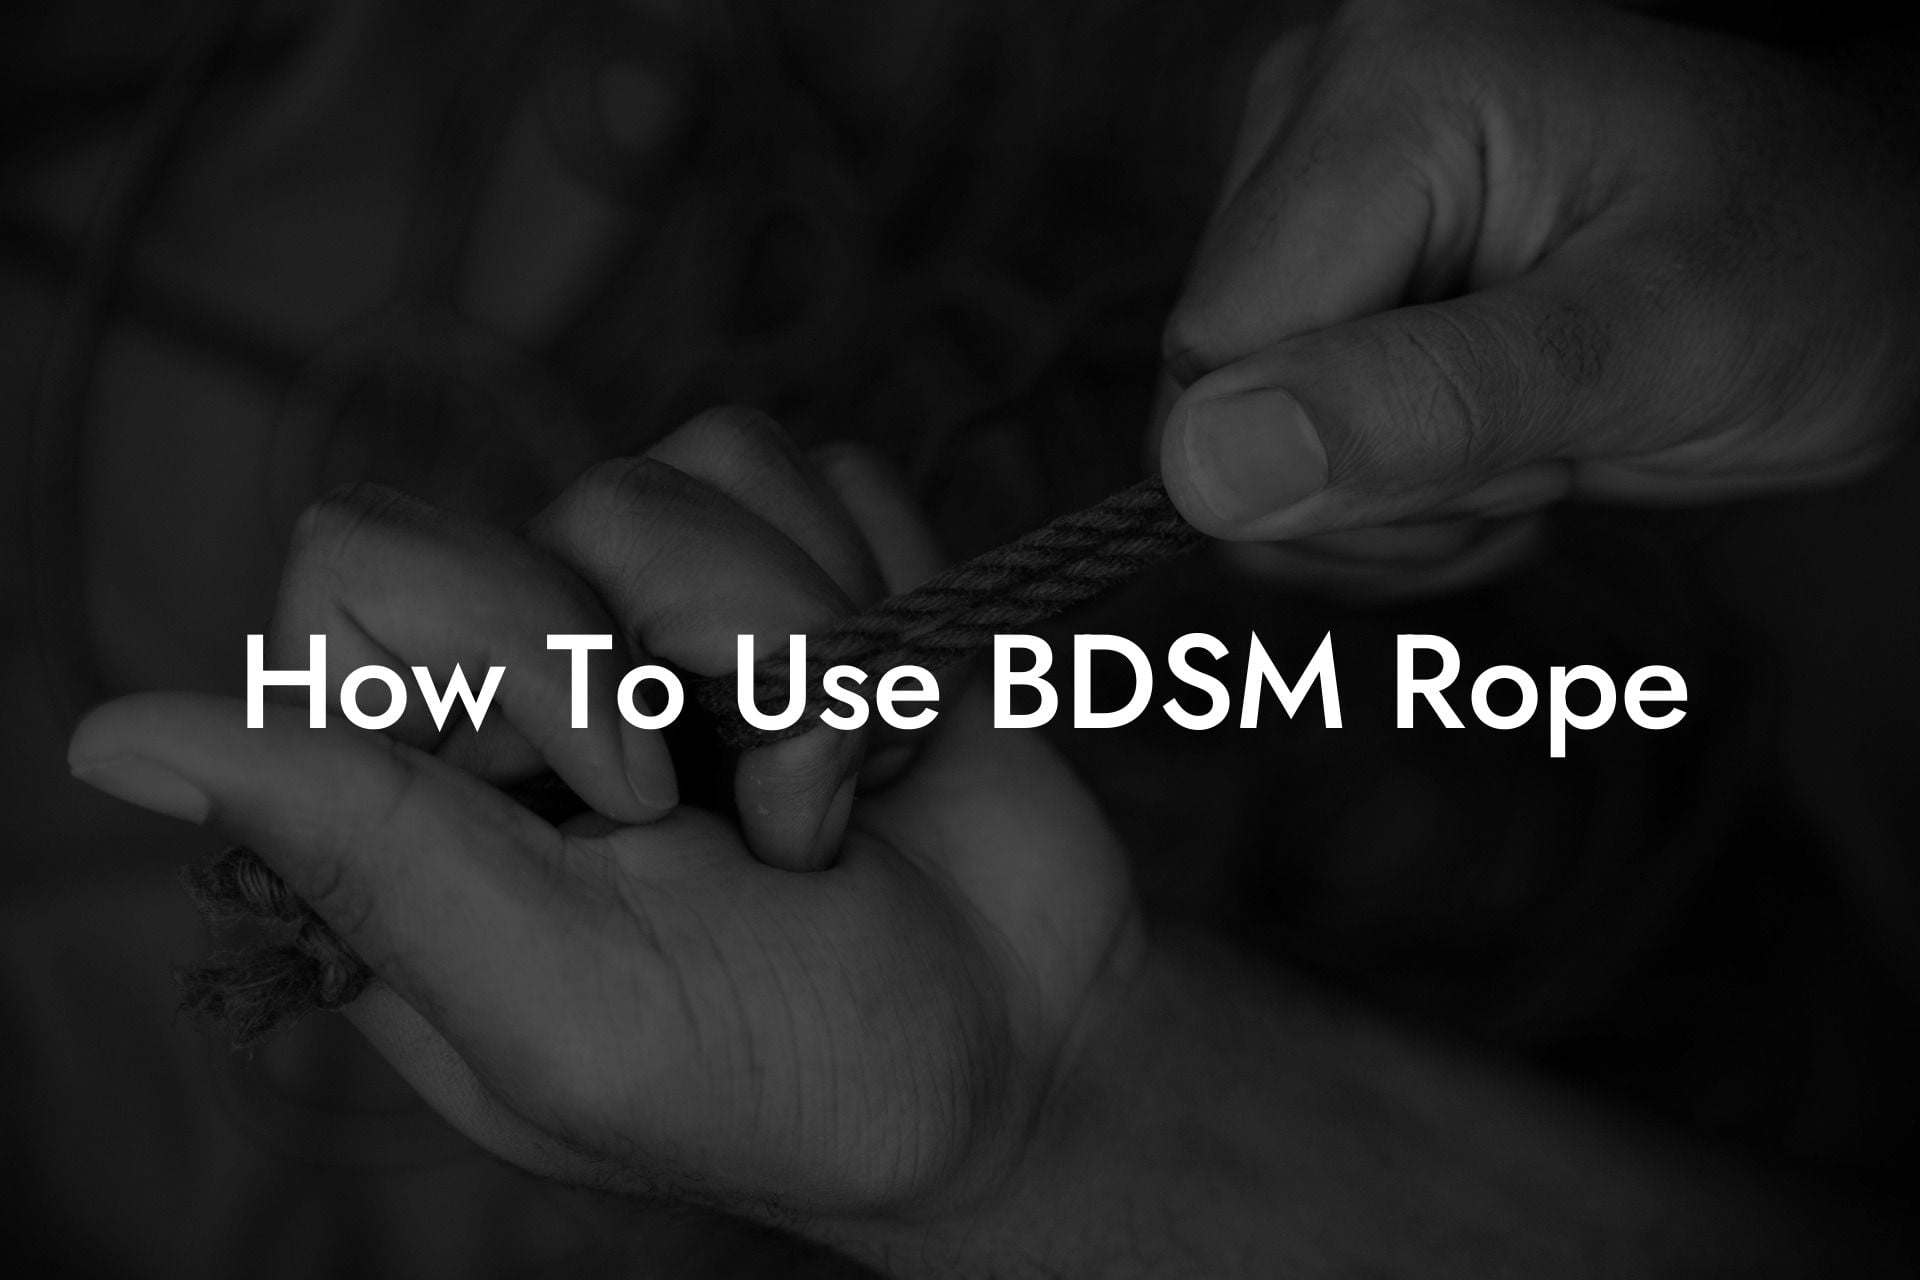 How To Use BDSM Rope